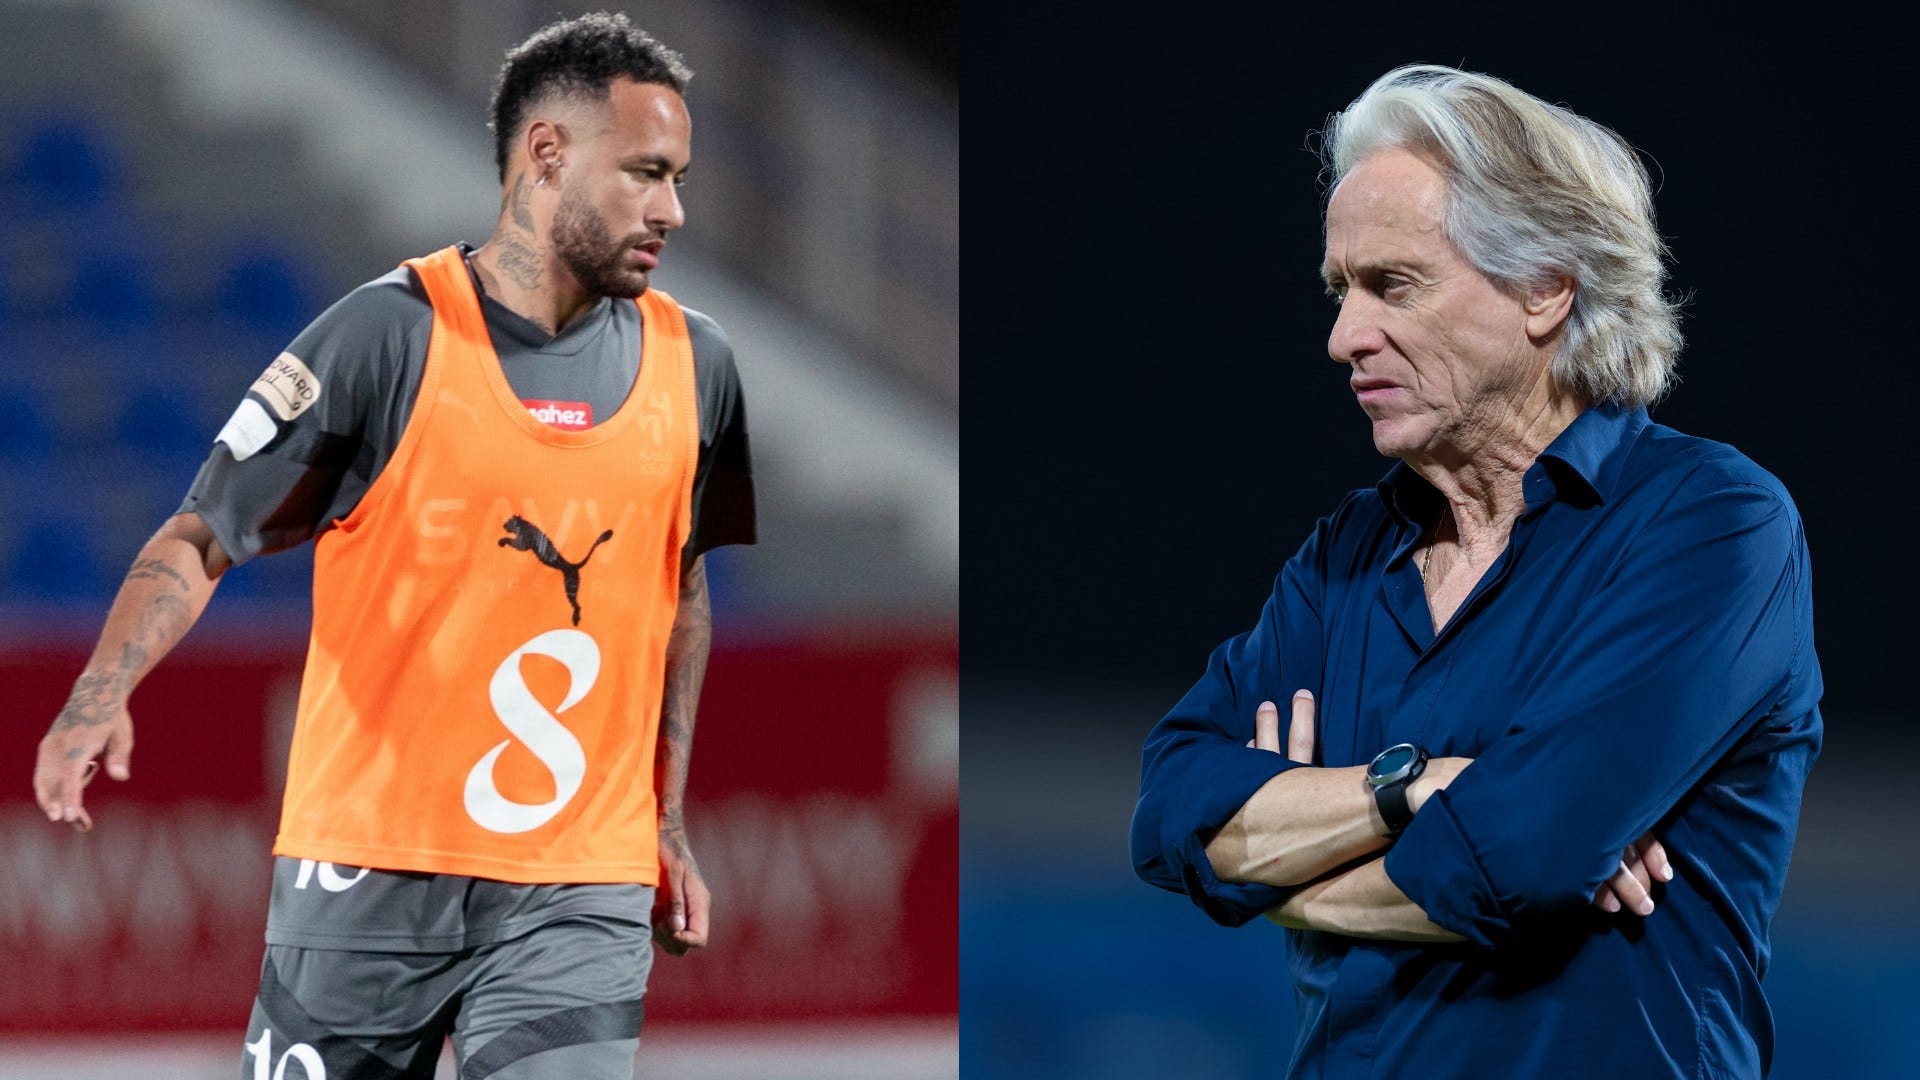 Jesus reveals the secret behind leaving Neymar out of Al Hilal’s starting line-up against Riyadh… for this important reason!